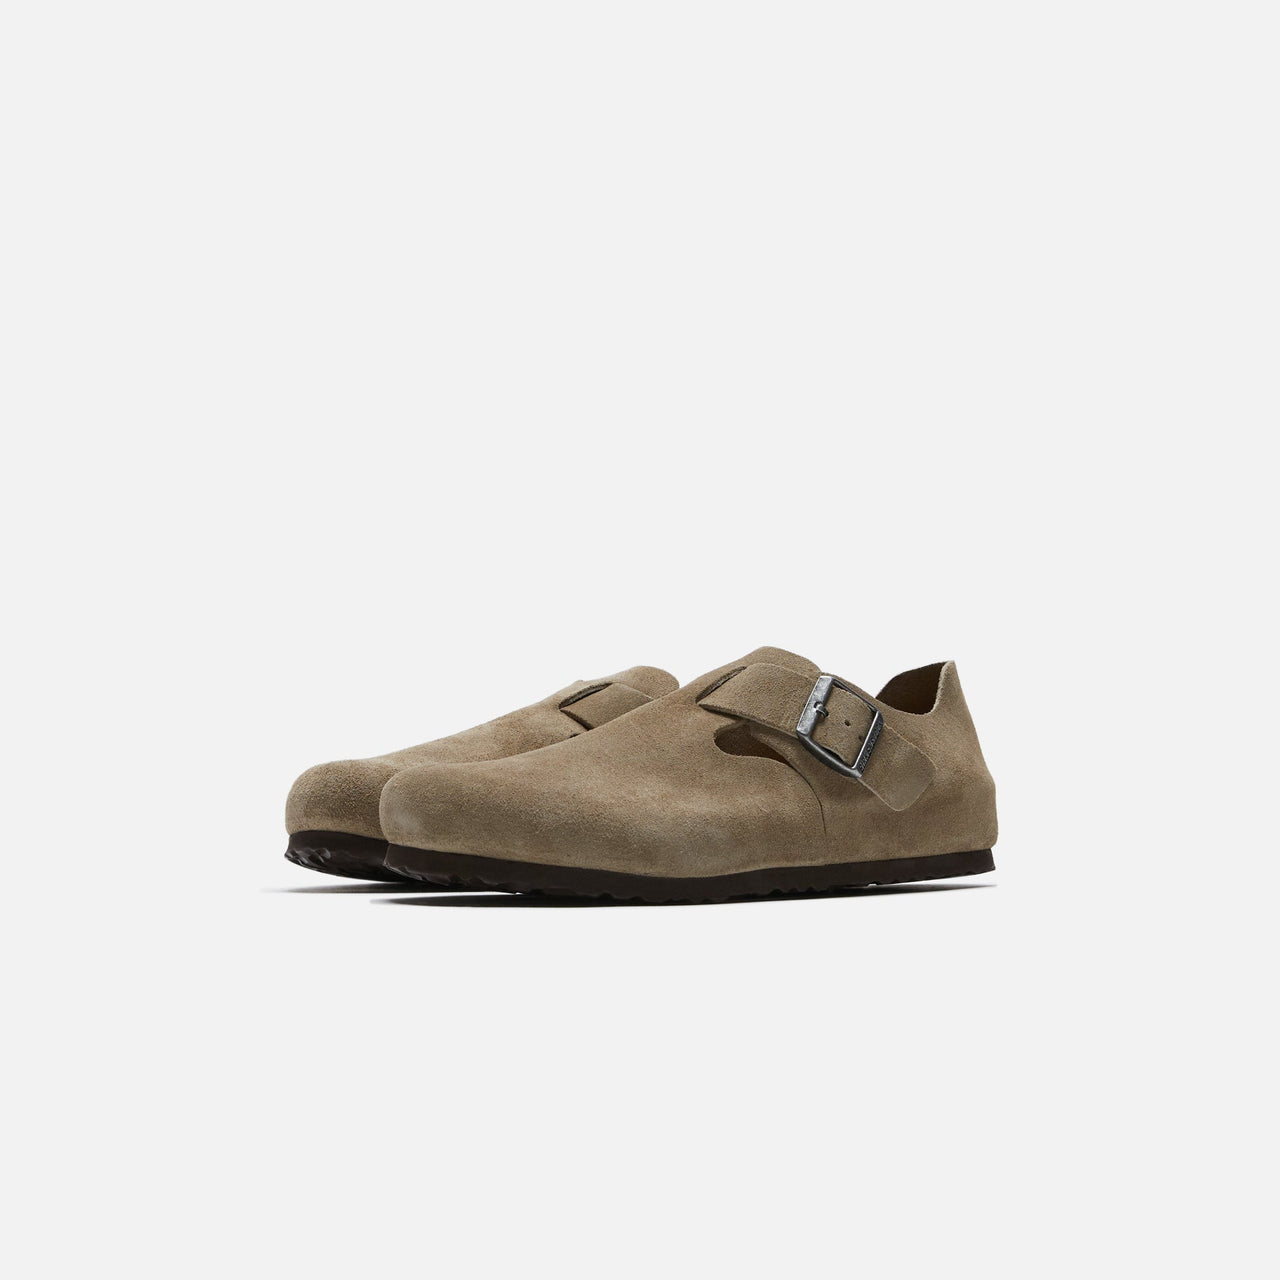 Comfortable Birkenstock London Suede Taupe clogs for all-day wear